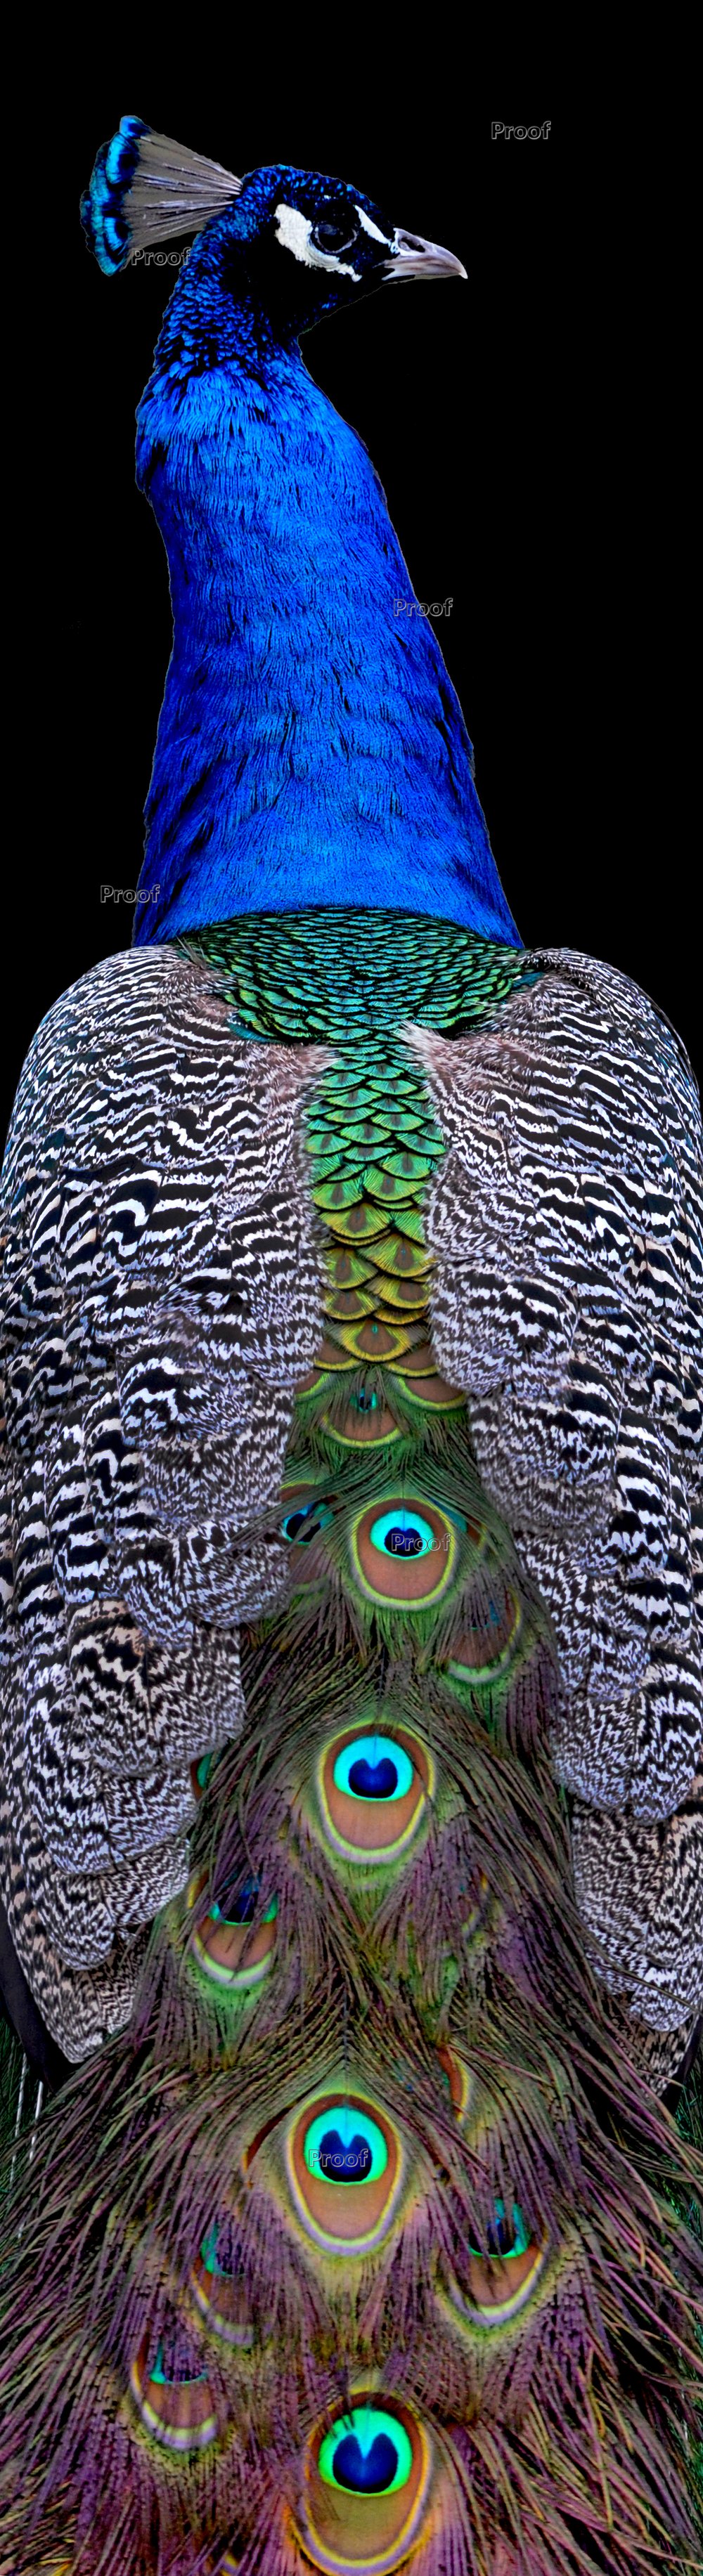 Image of Detroit Zoo Peacock